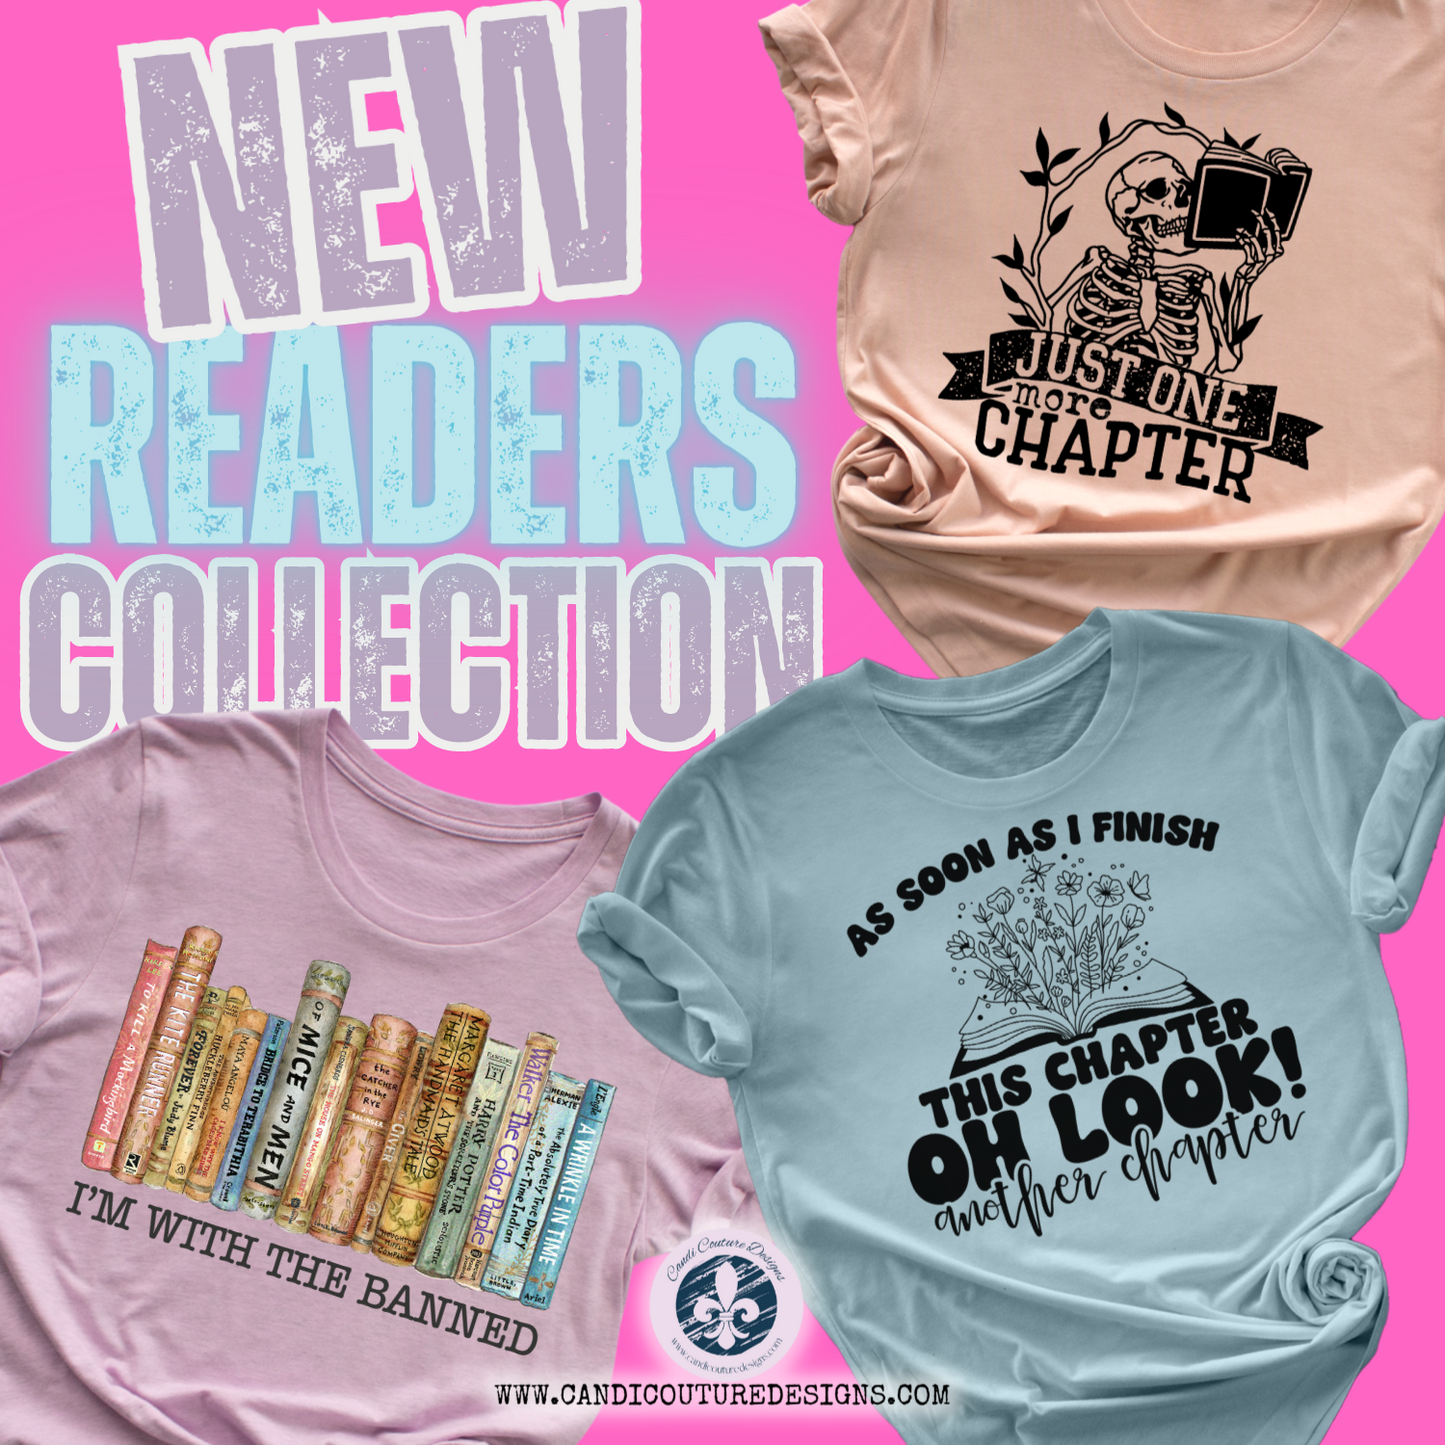 Oh Look Another Chapter Graphic Tee for Book Lovers - Show Your Passion in Style